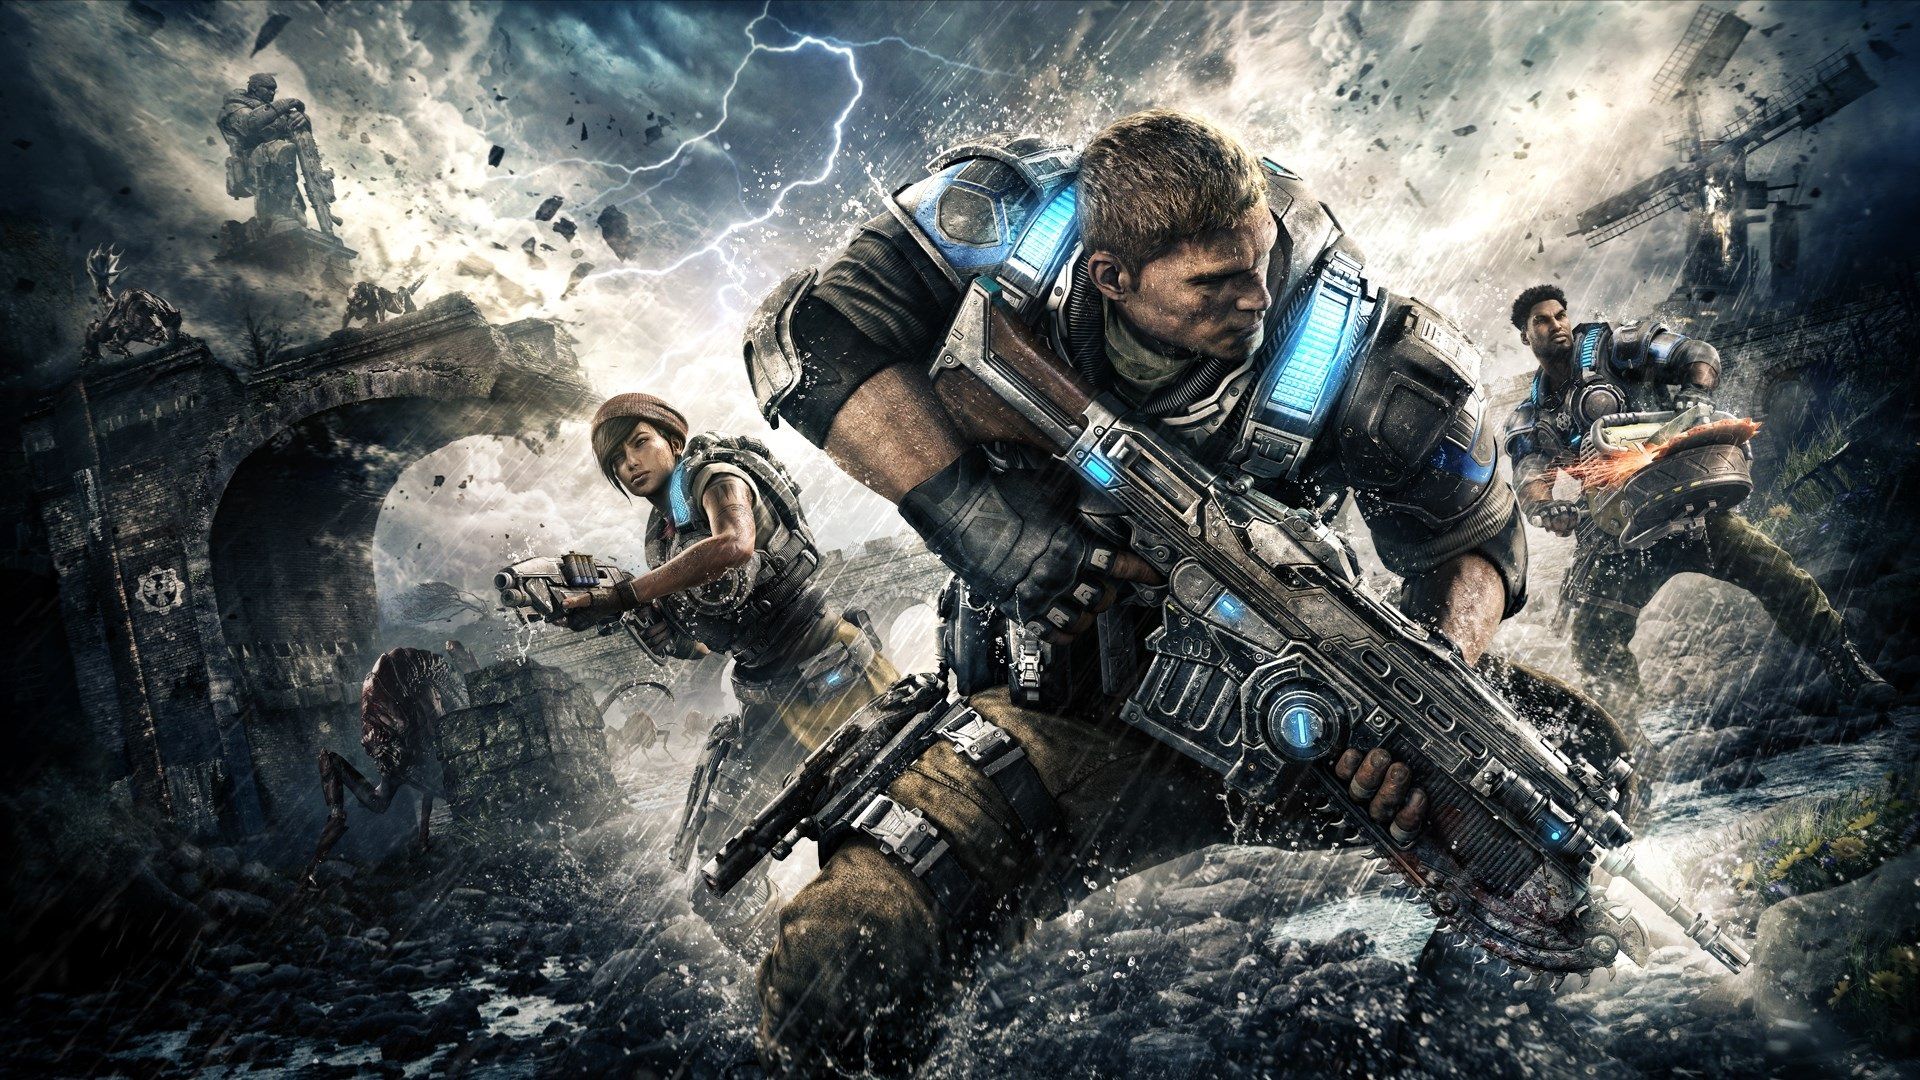 Key Art for Gears of War 4 showing soldiers crouching down in a desolate wasteland